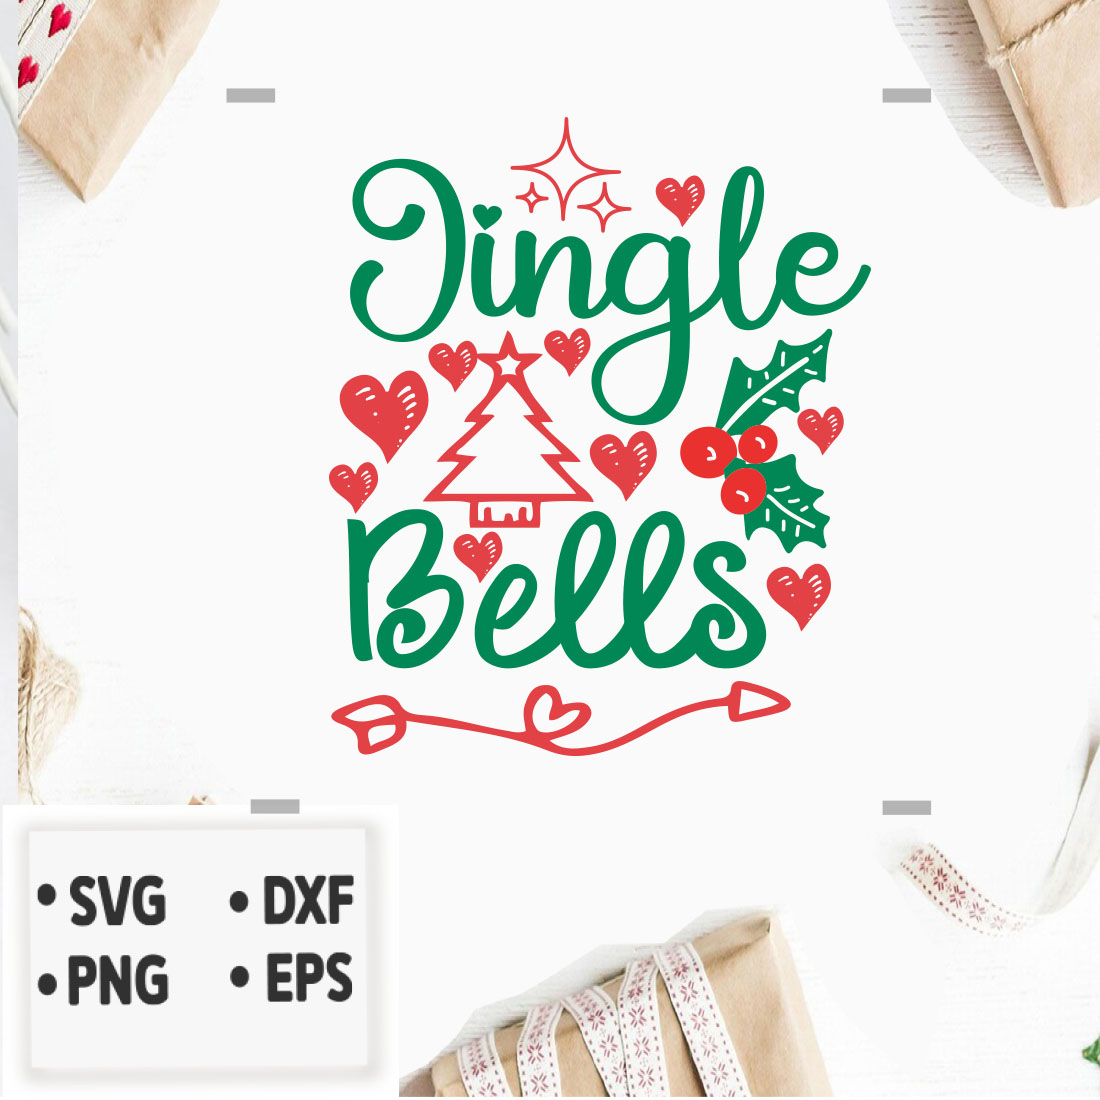 Image with great print Jingle bells.